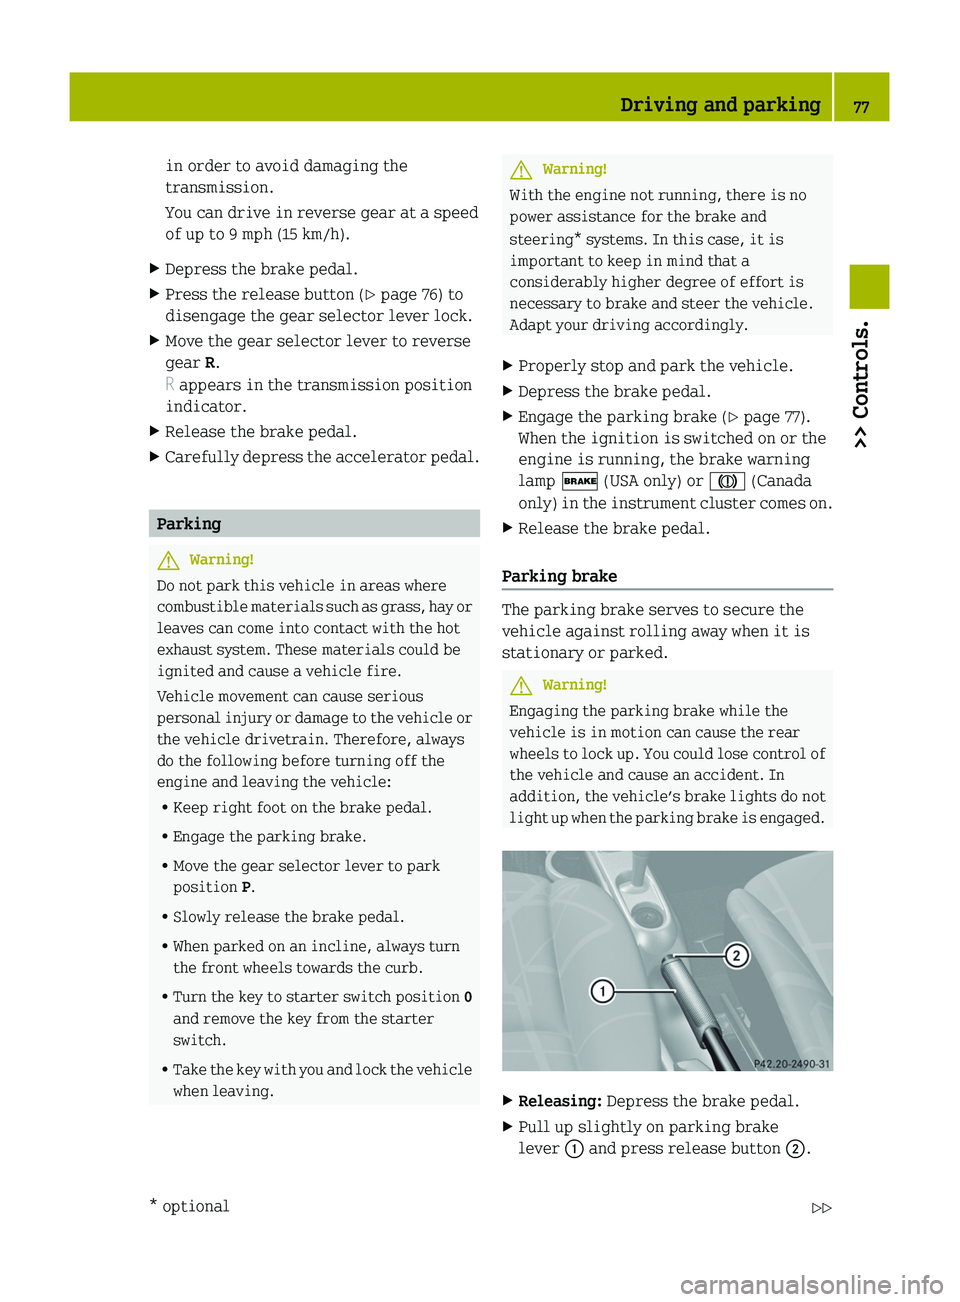 SMART FORTWO COUPE 2010  Owners Manual in order to avoid damaging the
transmission.
You can drive in reverse gear at a speed
of up to 9 mph (15 km/h).XDepress the brake pedal.XPress the release button ( Y page 76) to
disengage the gear sel